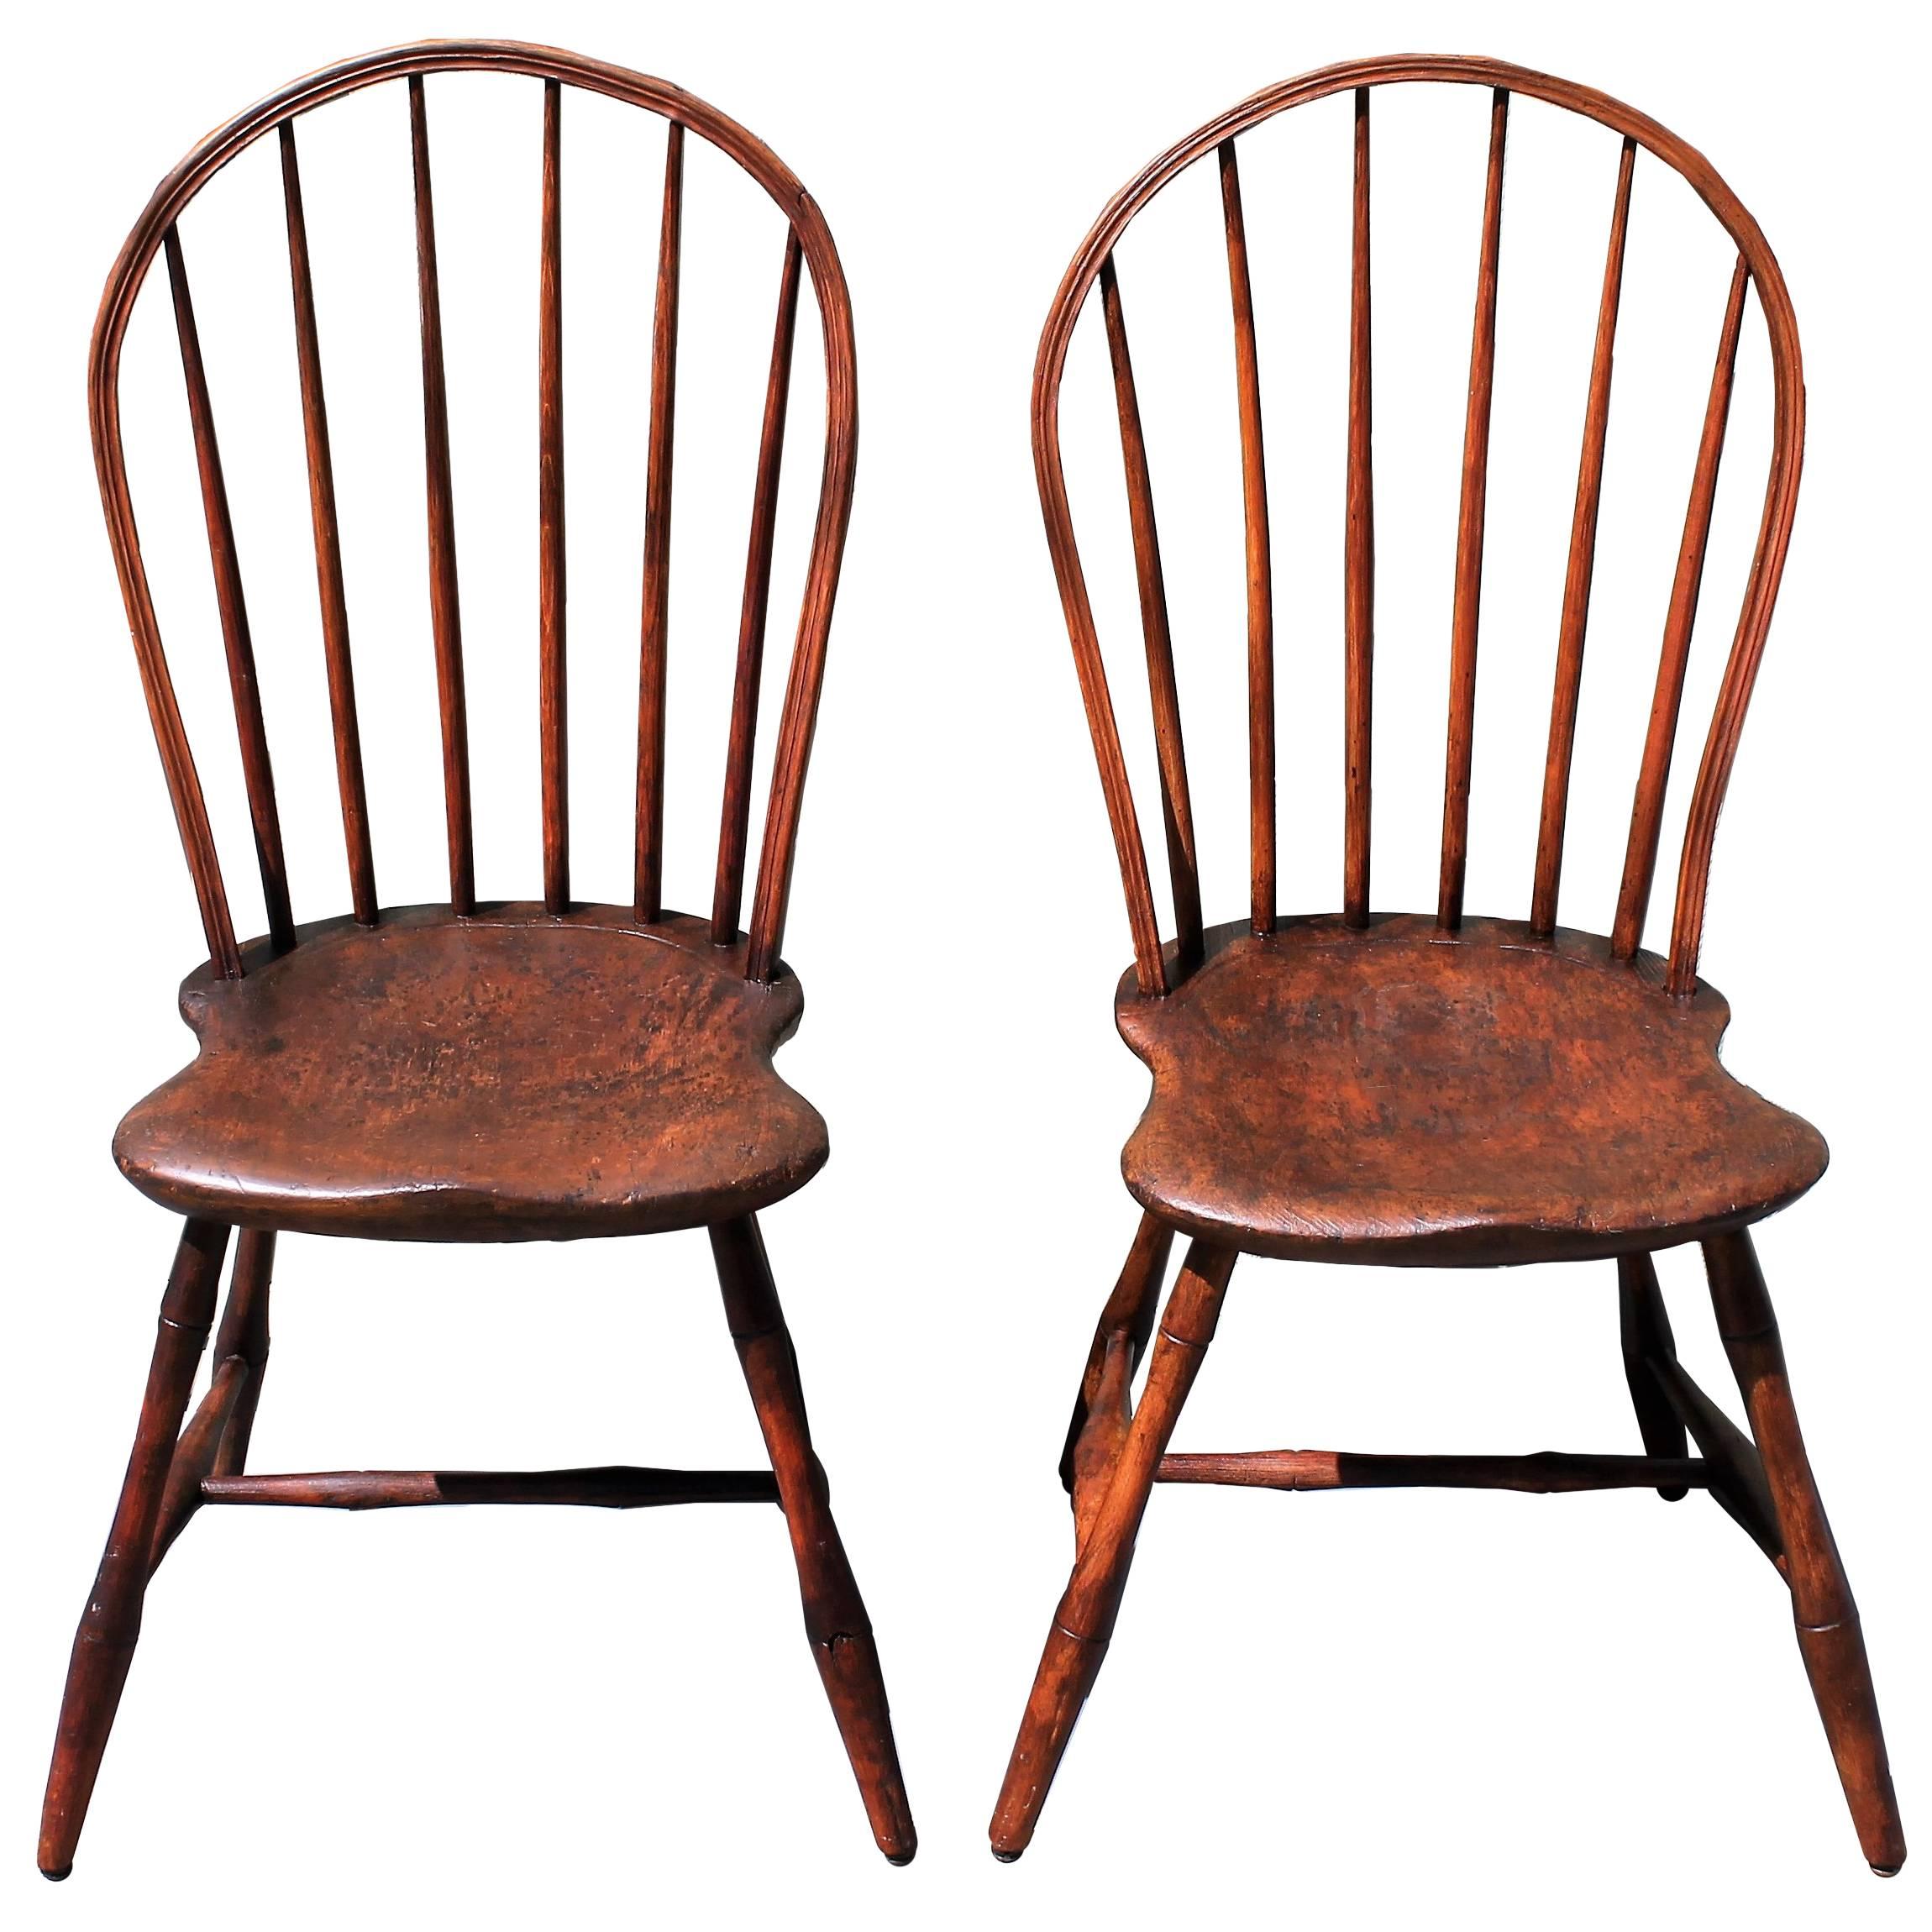 Pair of 18th Century Old Surface Windsor Chairs from New England